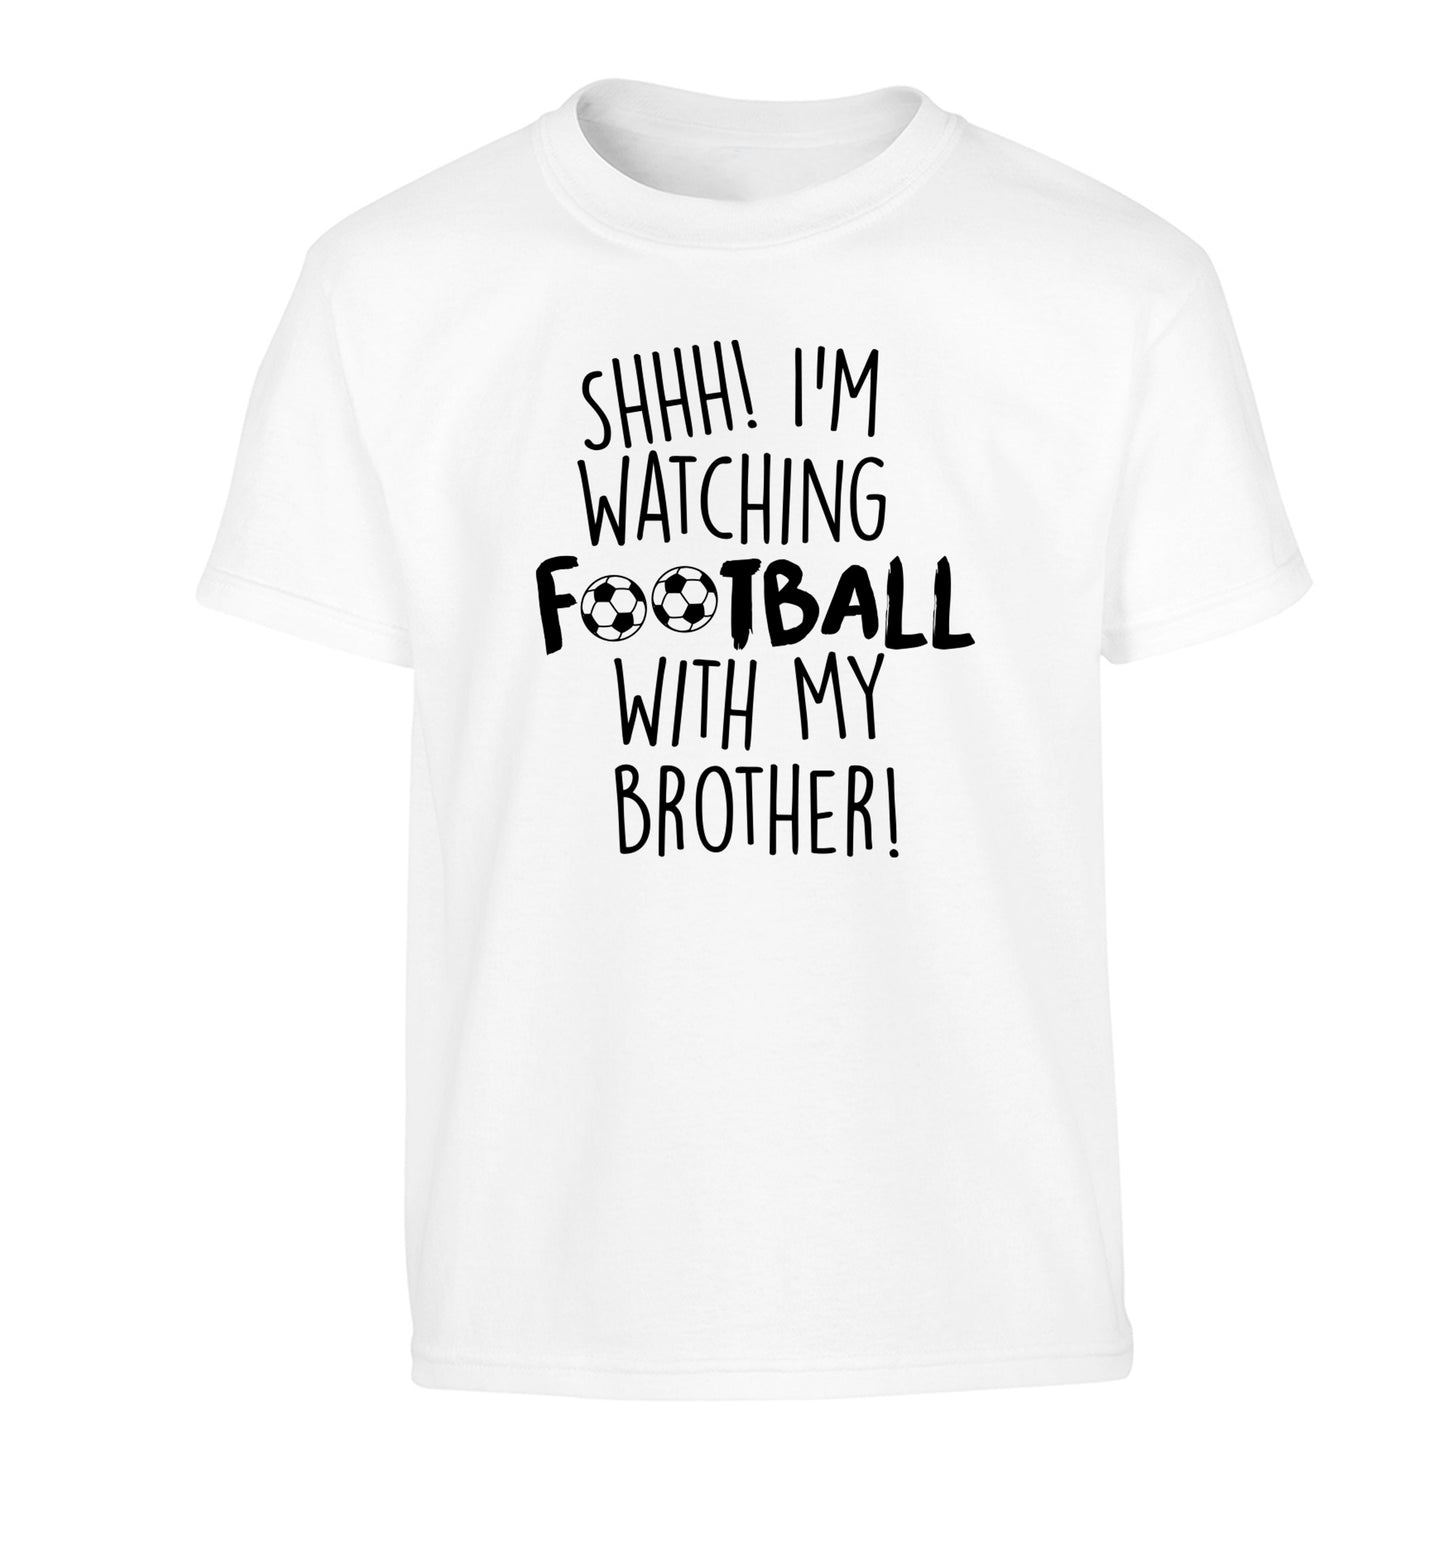 Shhh I'm watching football with my brother Children's white Tshirt 12-14 Years